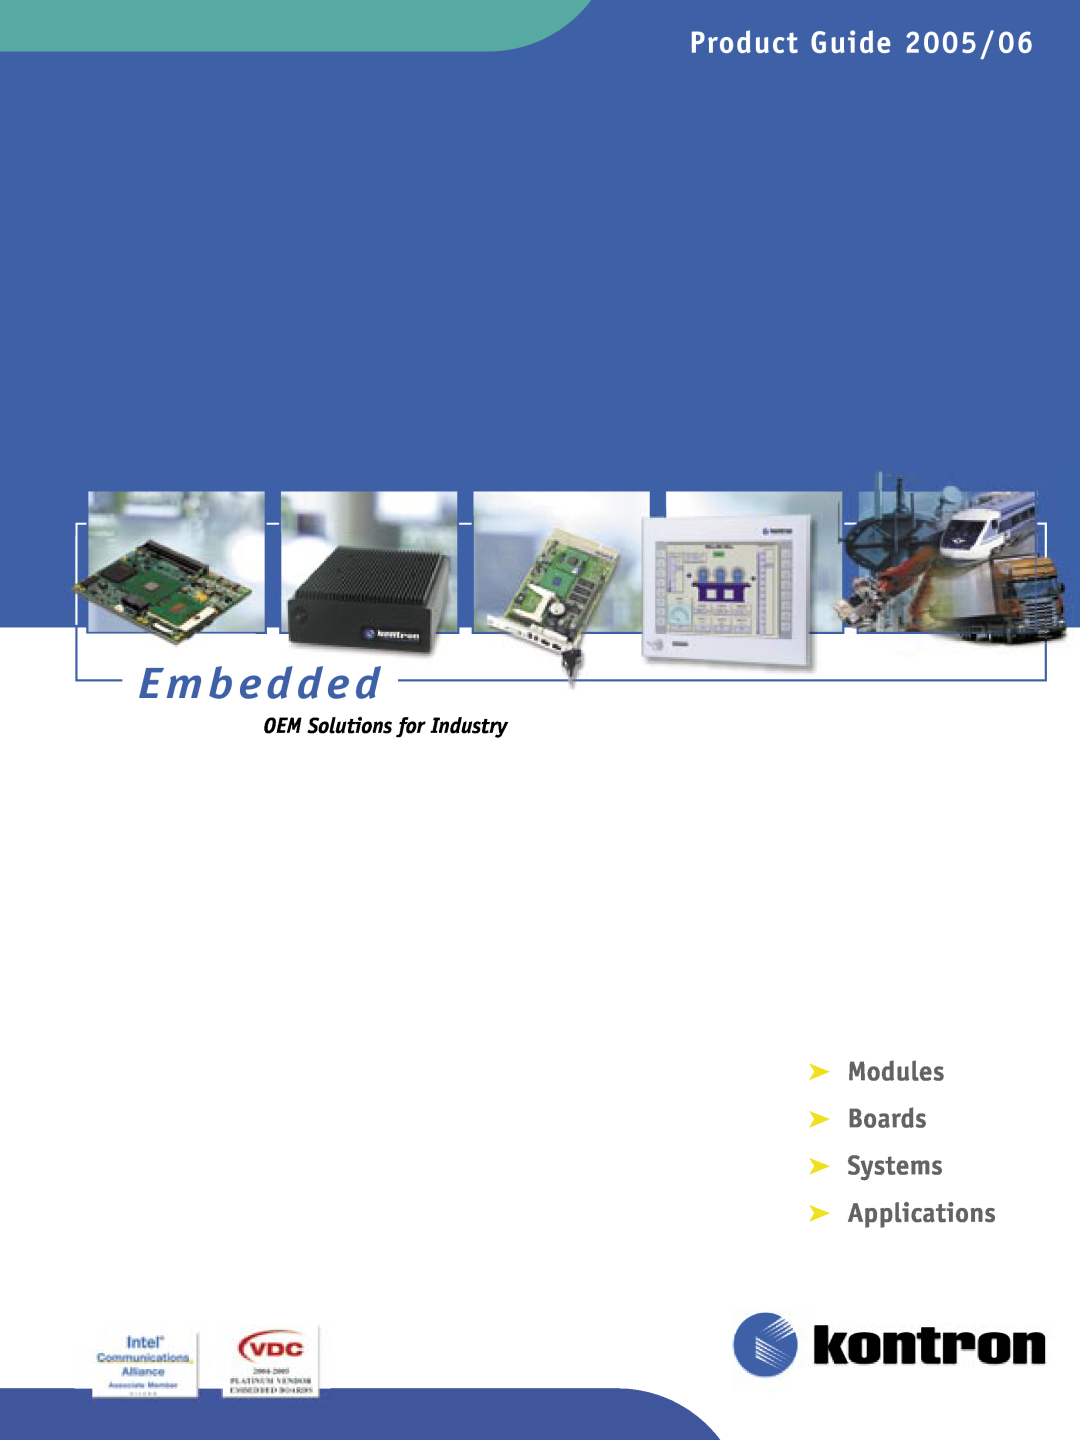 Intel Ethernet Switch Boards manual Embedded, Product Guide 2005/06,  Modules  Boards  Systems  Applications 